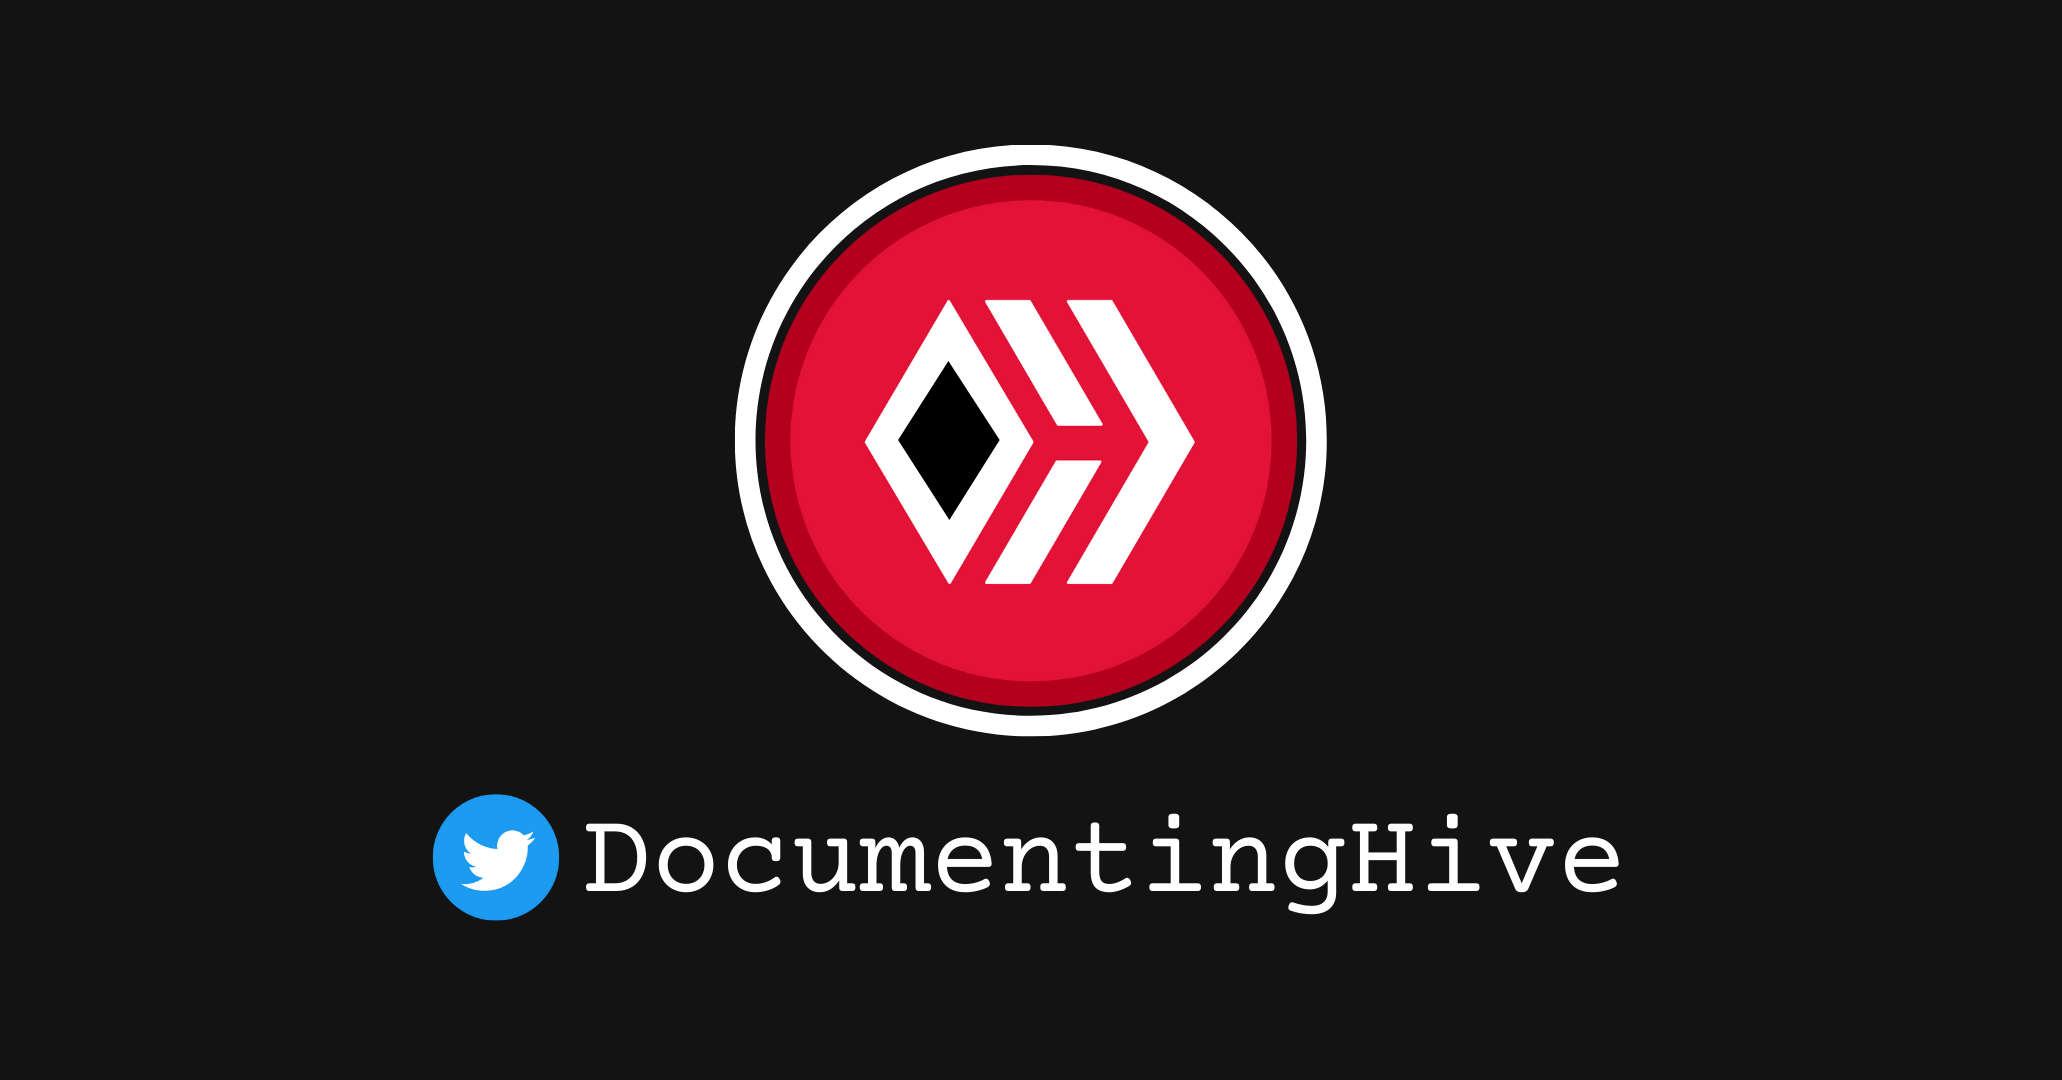 DocumentingHive.png